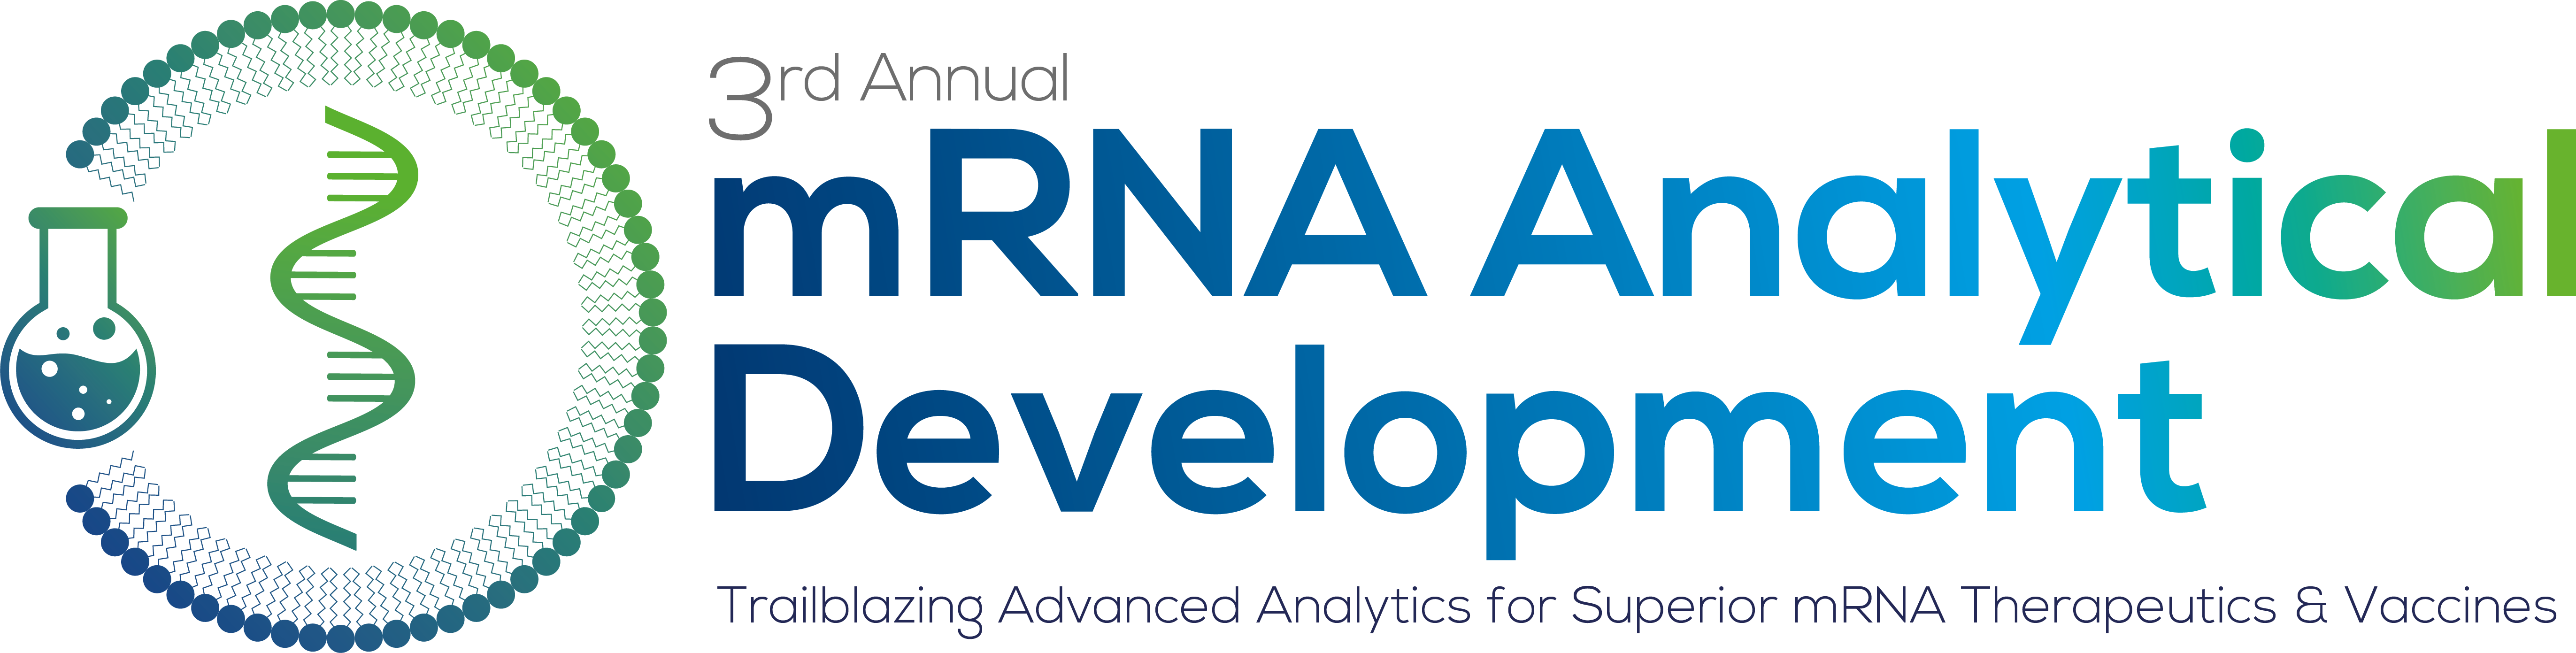 3rd mRNA Analytical Development Summit logo FINAL With Tag